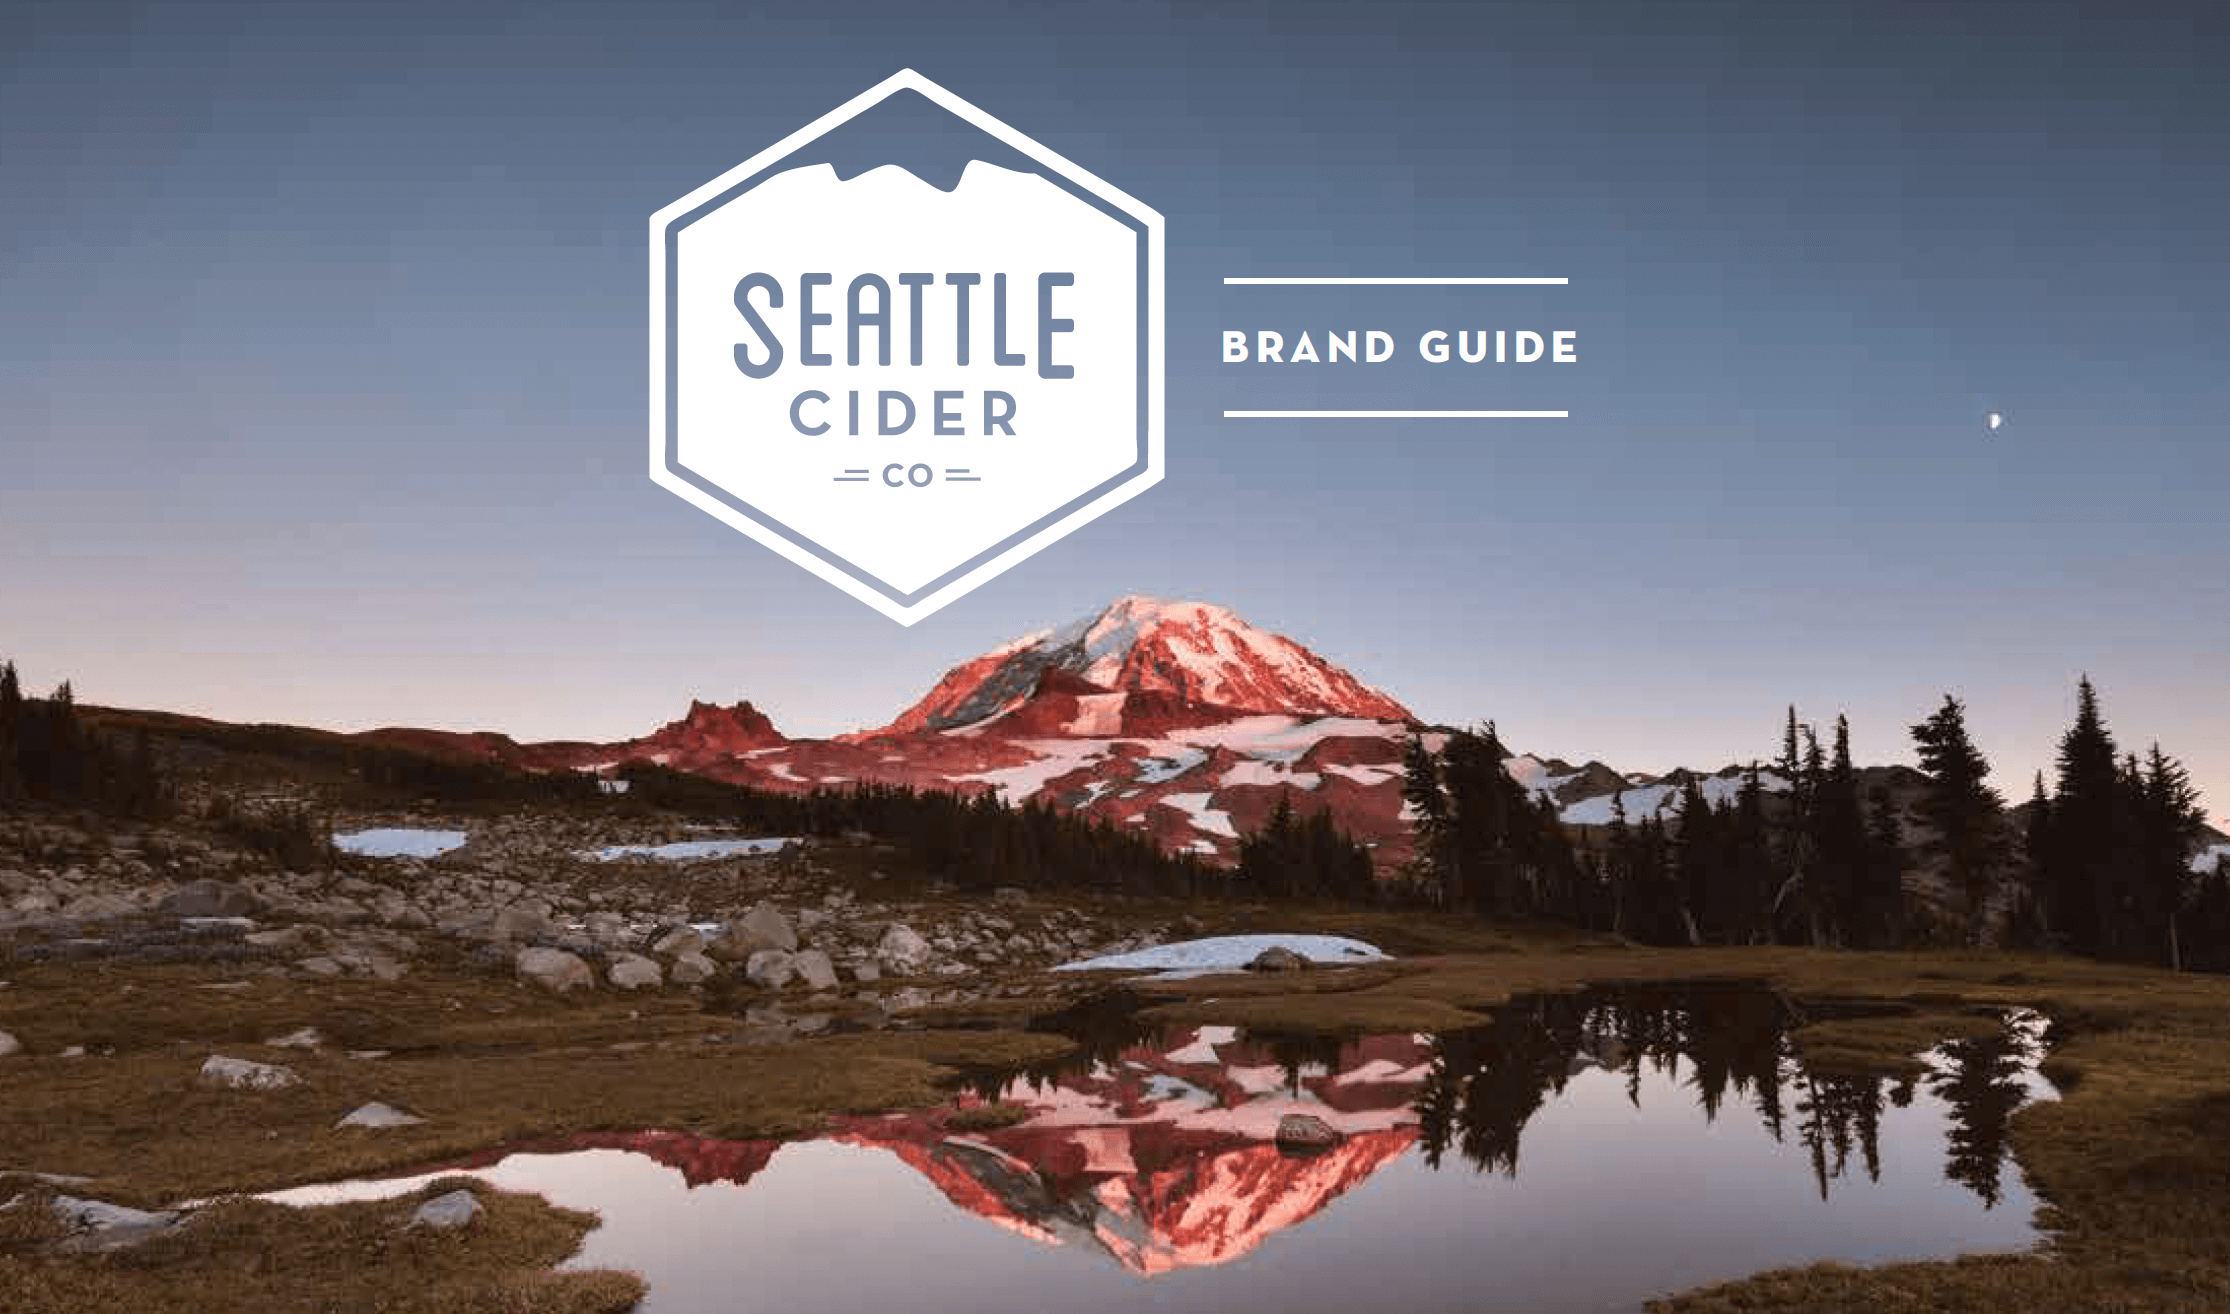 Seattle Cider Brand Guide Image